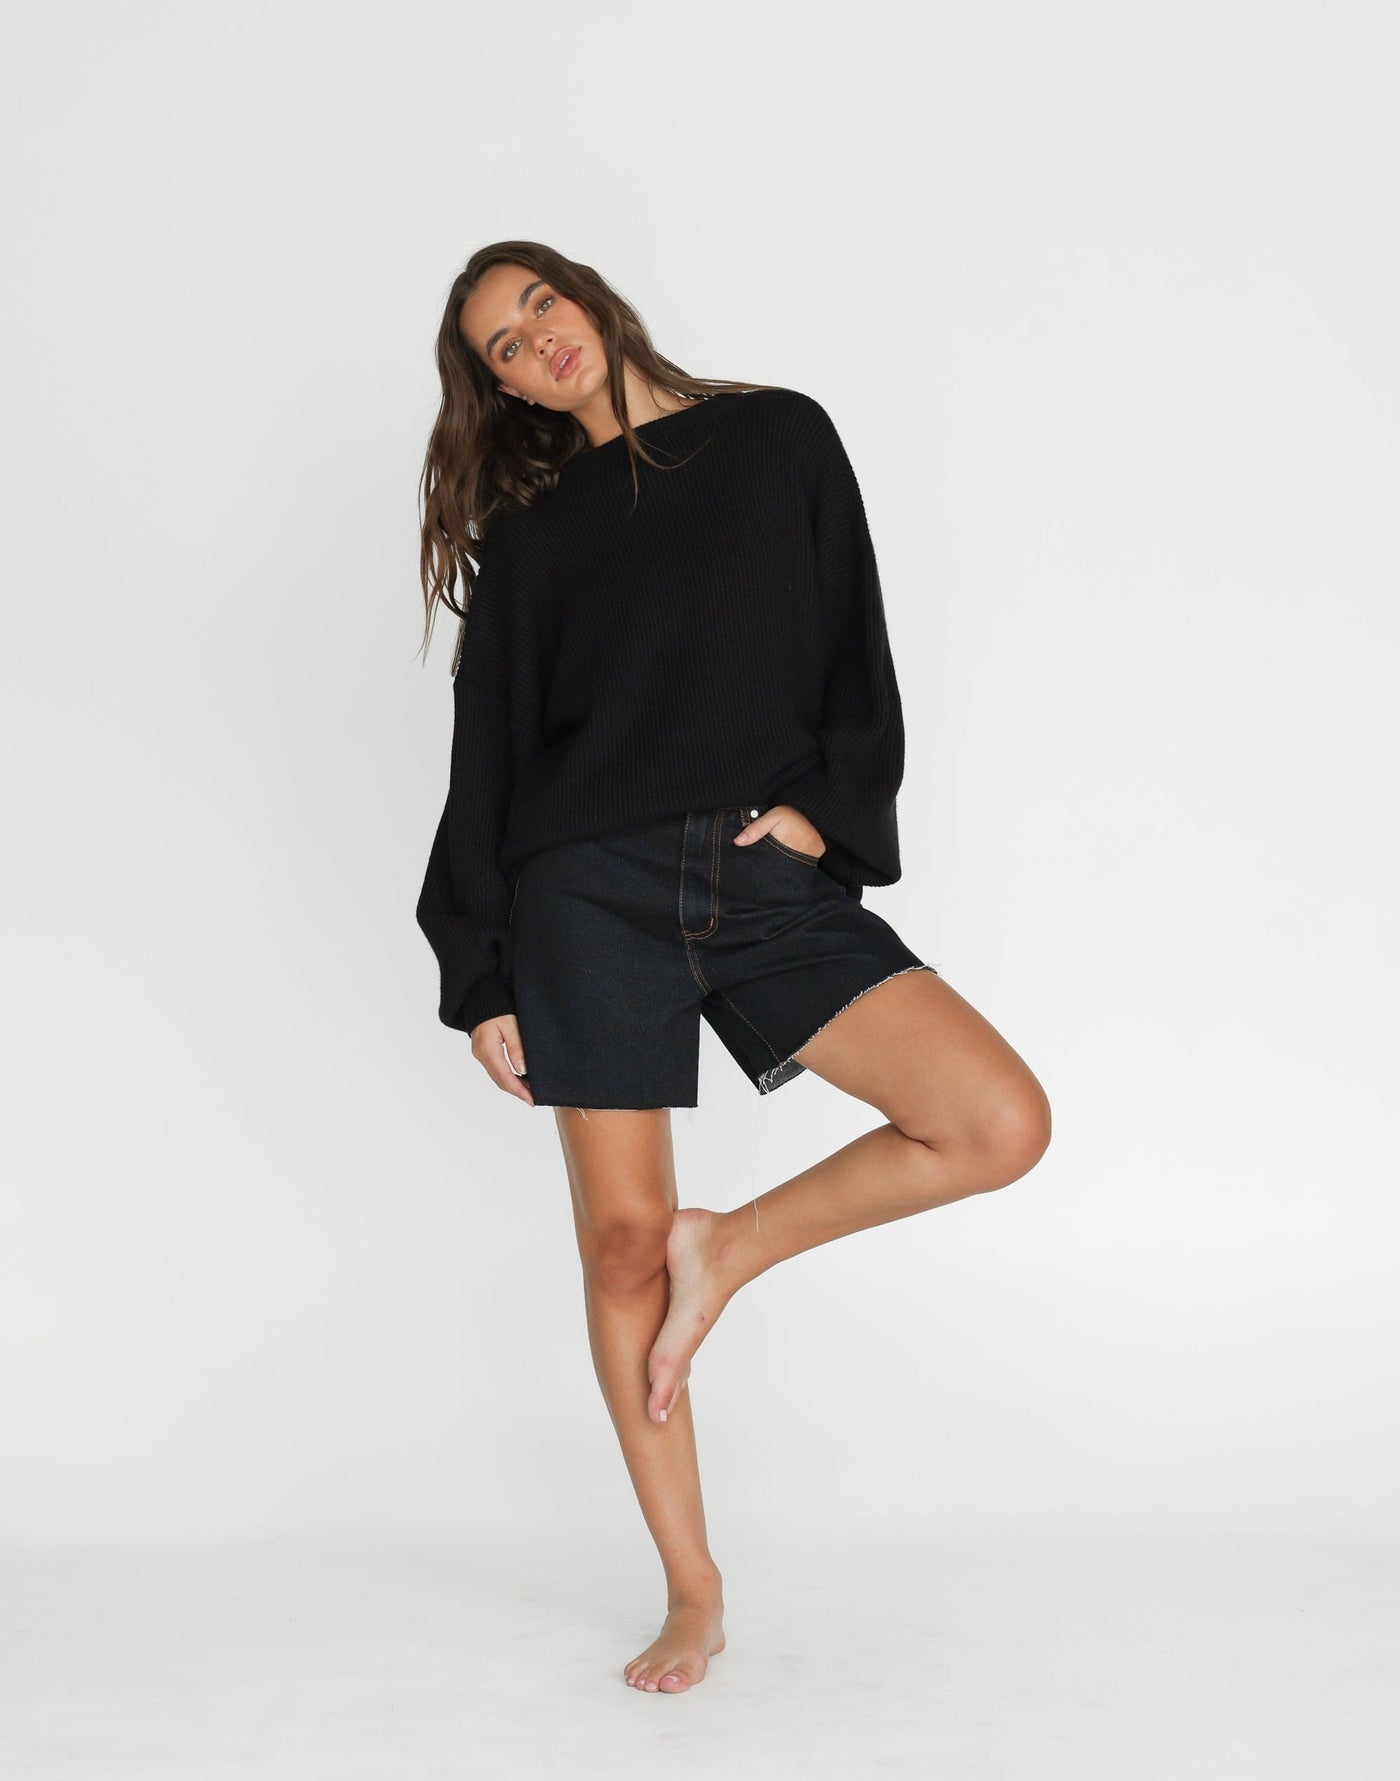 Cody Oversized Jumper (Black) | CHARCOAL Exclusive -Black Oversized Knit Jumper - Women's Top - Charcoal Clothing